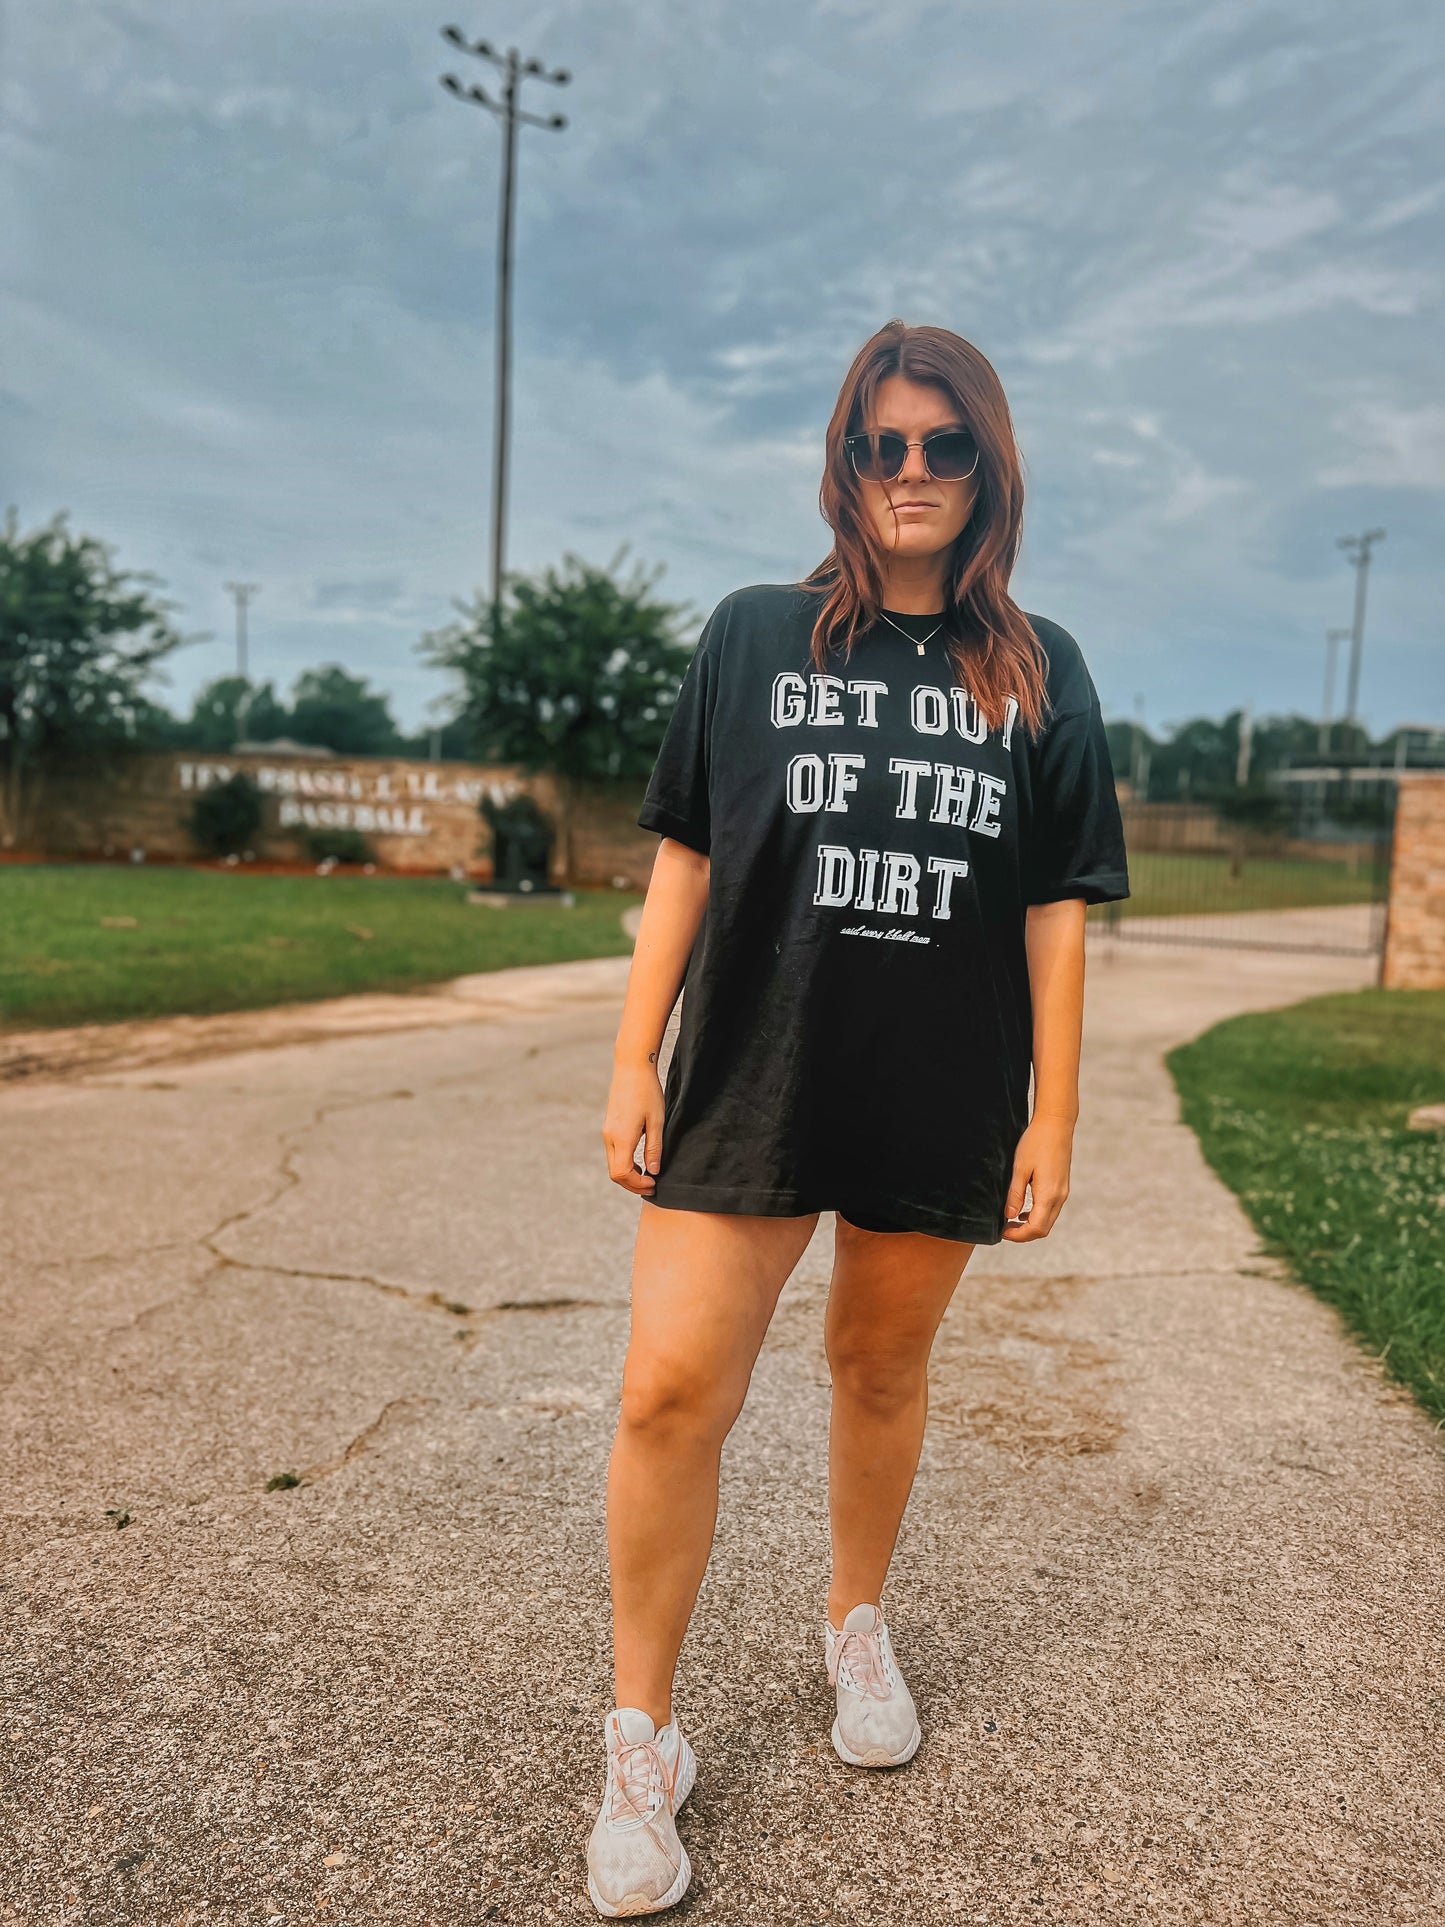 T-BALL MOM (get out of the dirt) - short sleeve tee